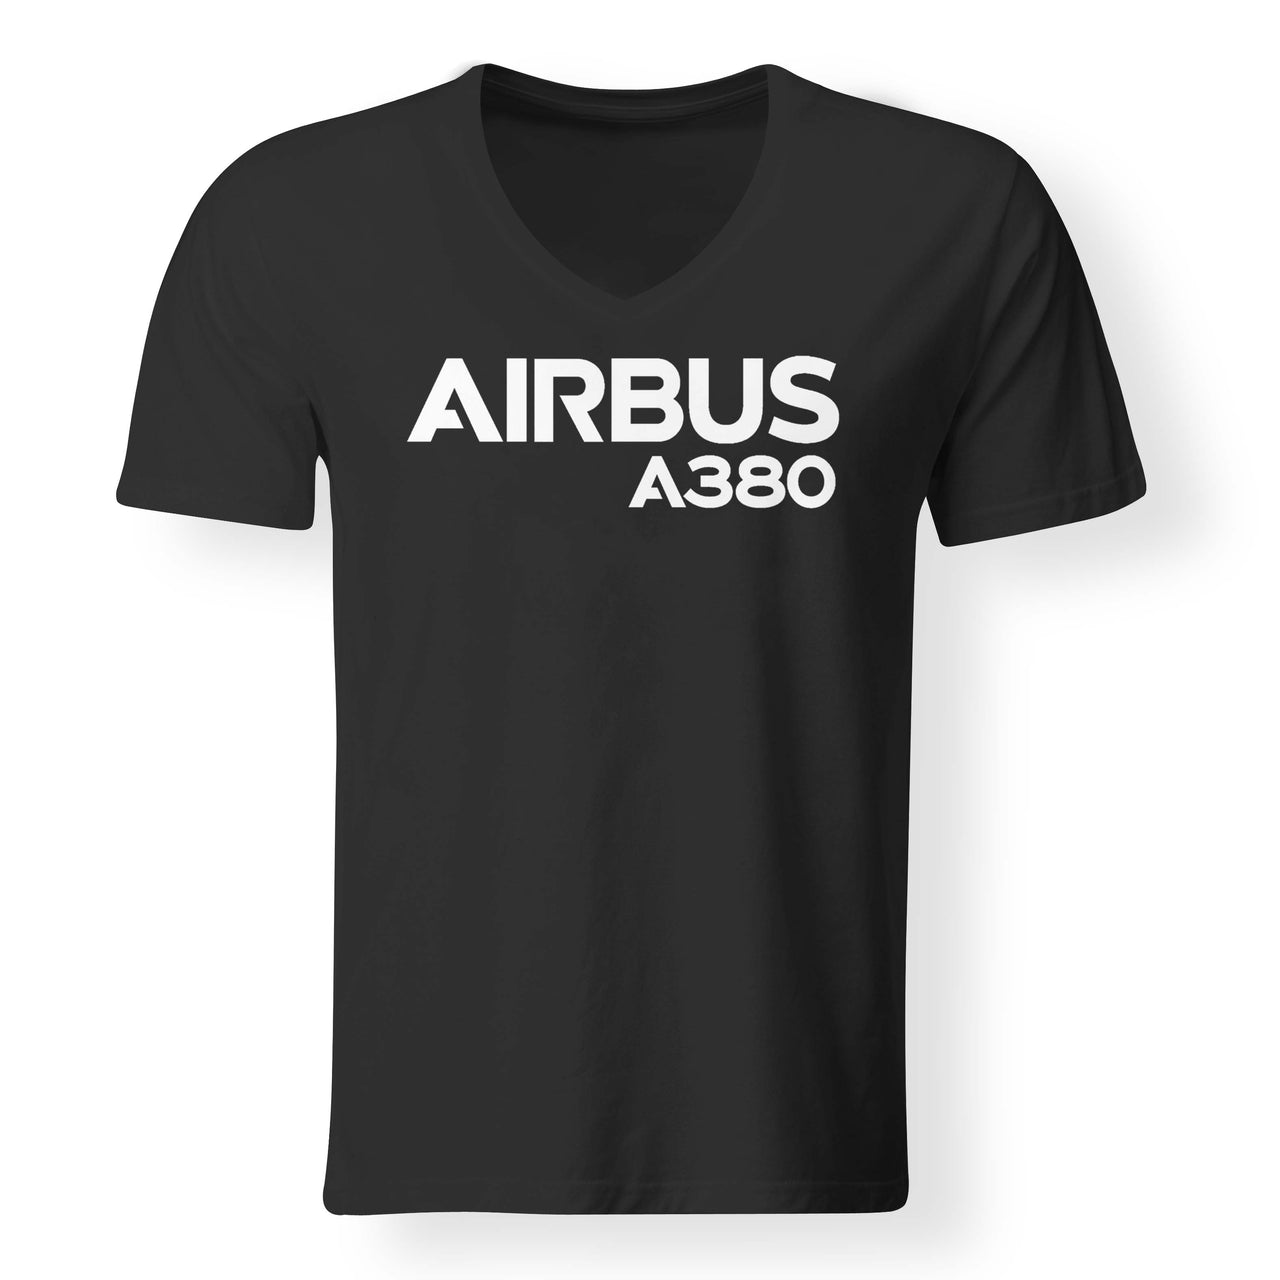 Airbus A380 & Text Designed V-Neck T-Shirts